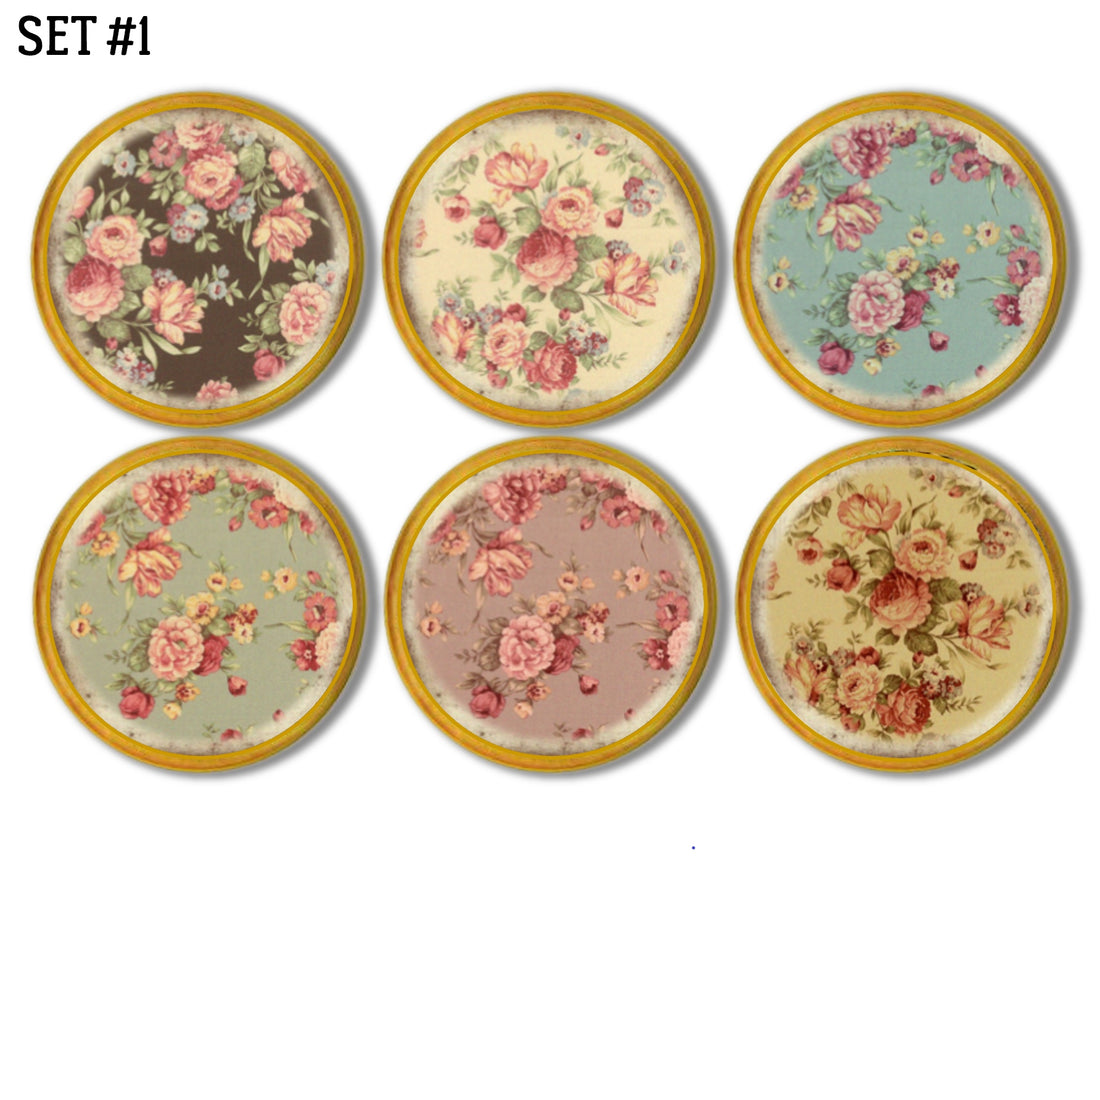 Natural wood cabinet knobs in shabby cottage floral patterns. Muted heirloom colors to compliment antique furniture decor.